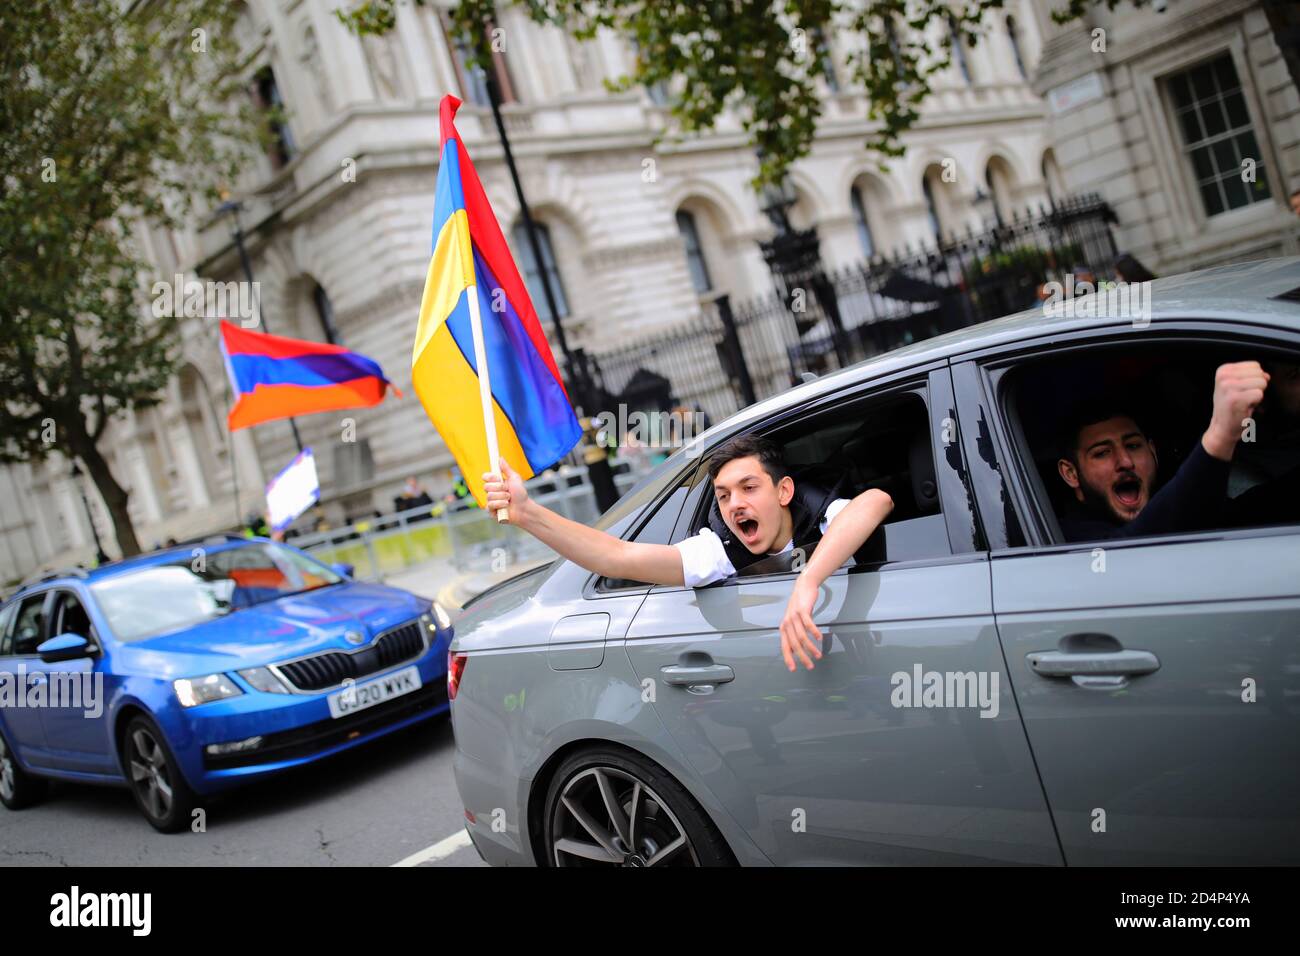 Pro-Armenian protesters waving an Armenian flag from a car, in Whitehall, London. The protest comes as Armenia and Azerbaijan have agreed to a ceasefire in Nagorno-Karabakh, despite claims by both sides that the other has breached the ceasefire. Stock Photo